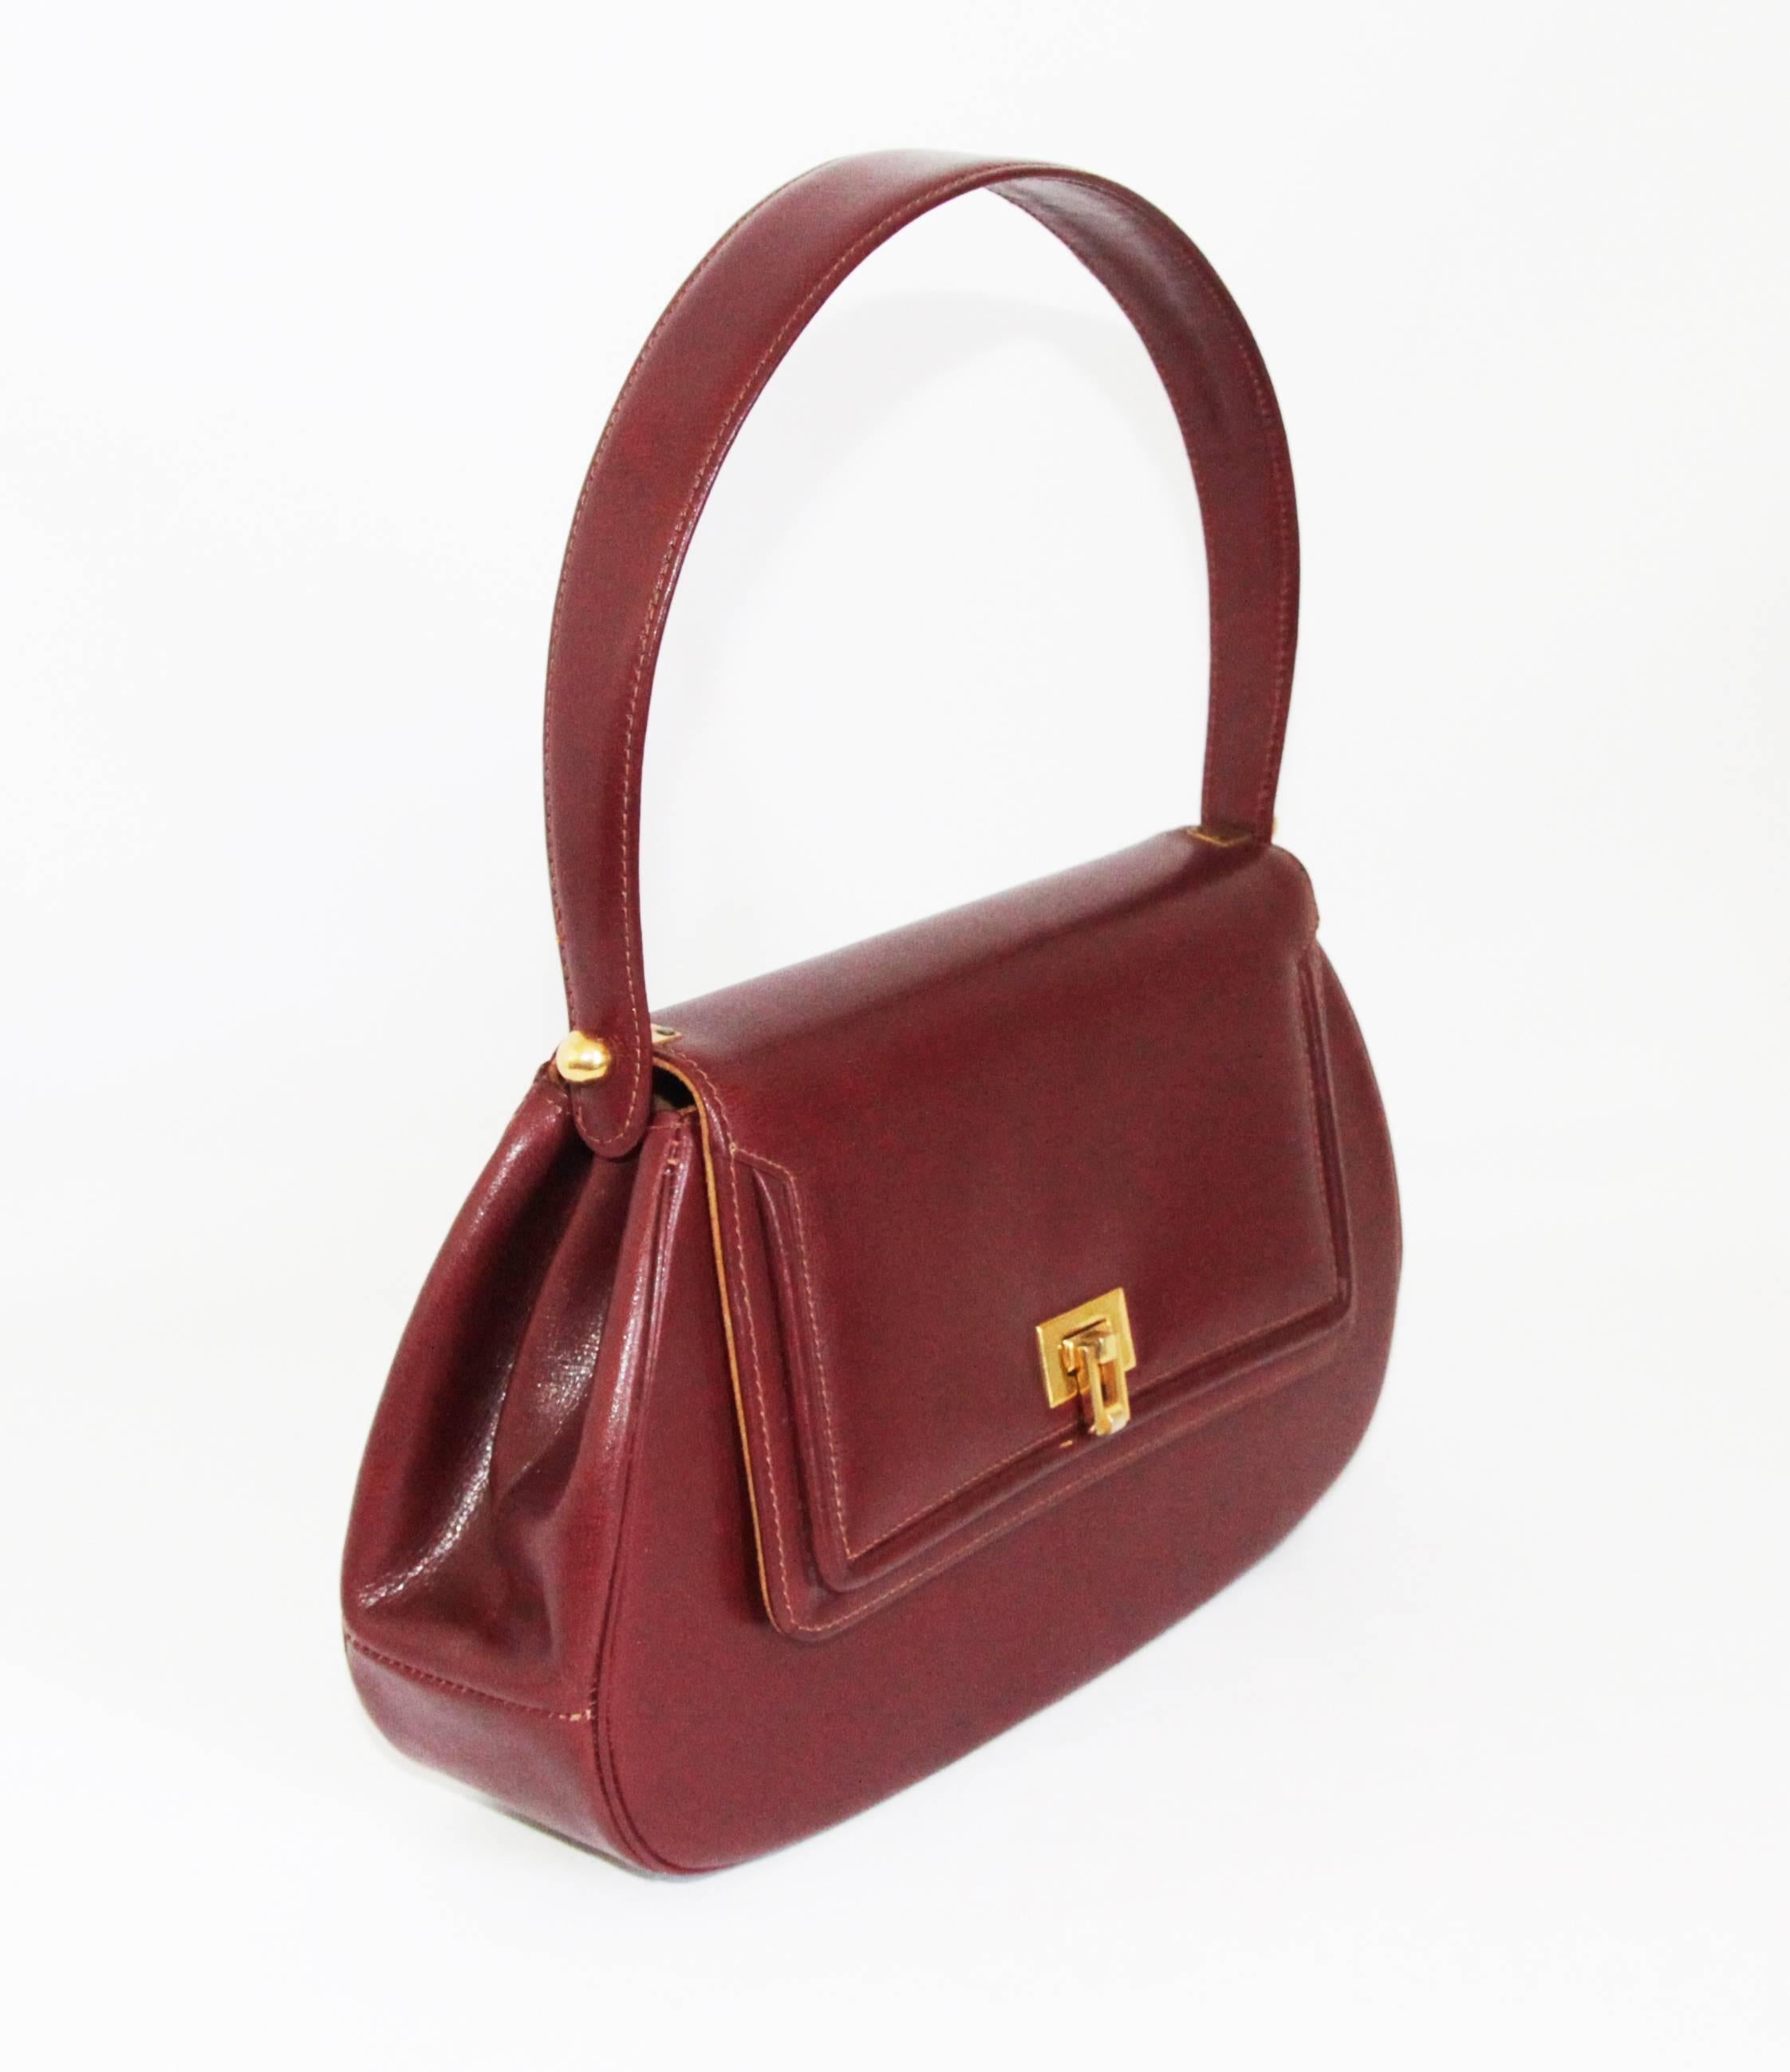 New look 50s burgundy box leather handbag. Suede lining. Rare and in exceptional condition. 

Size: 26 x 15 x 6 cm - 10 1/4 x 5.9 x 2 1/3 in. 

Excellent vintage condition (excellent leather condition). 